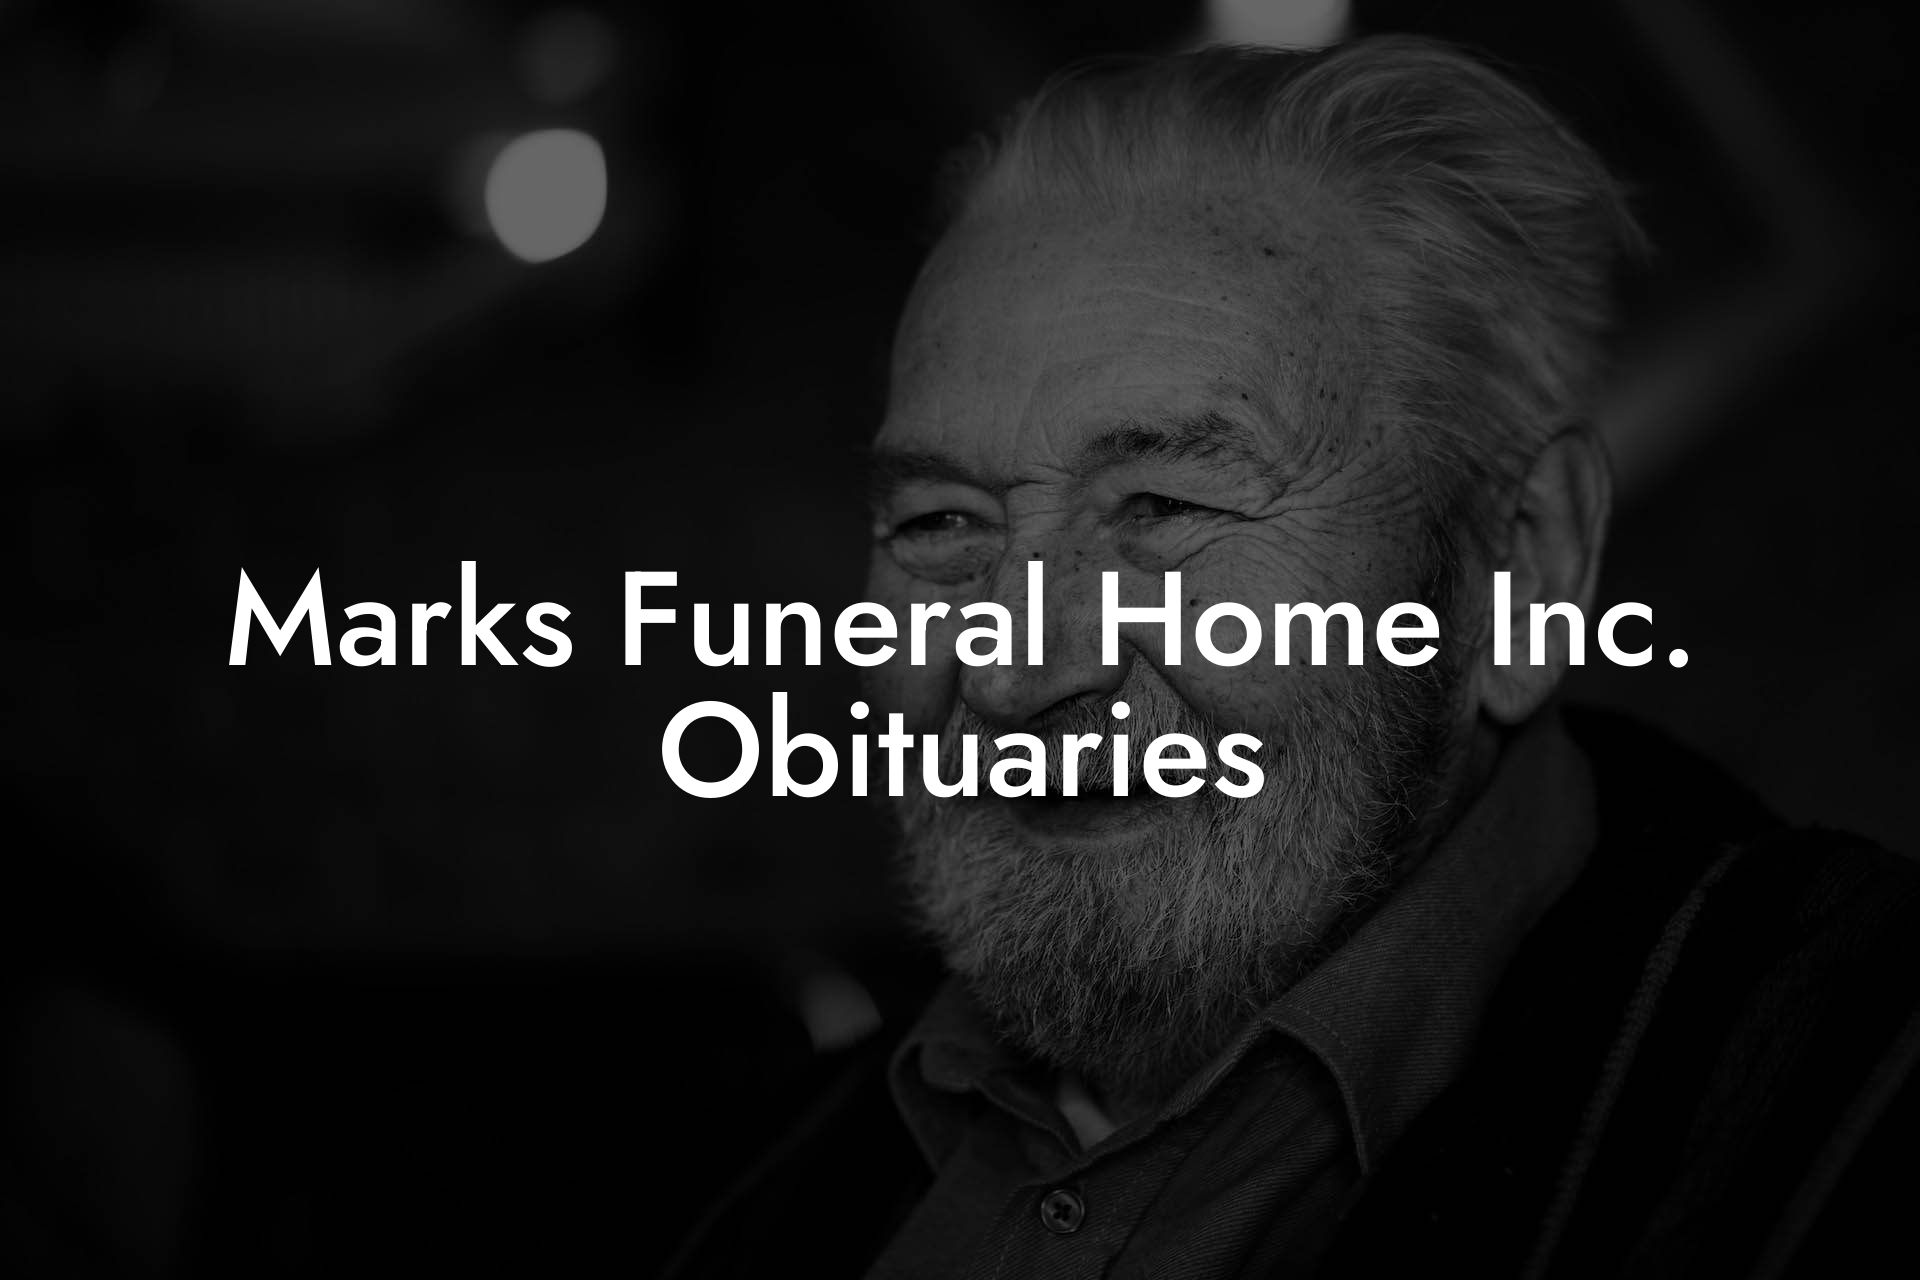 Marks Funeral Home Inc, Obituaries